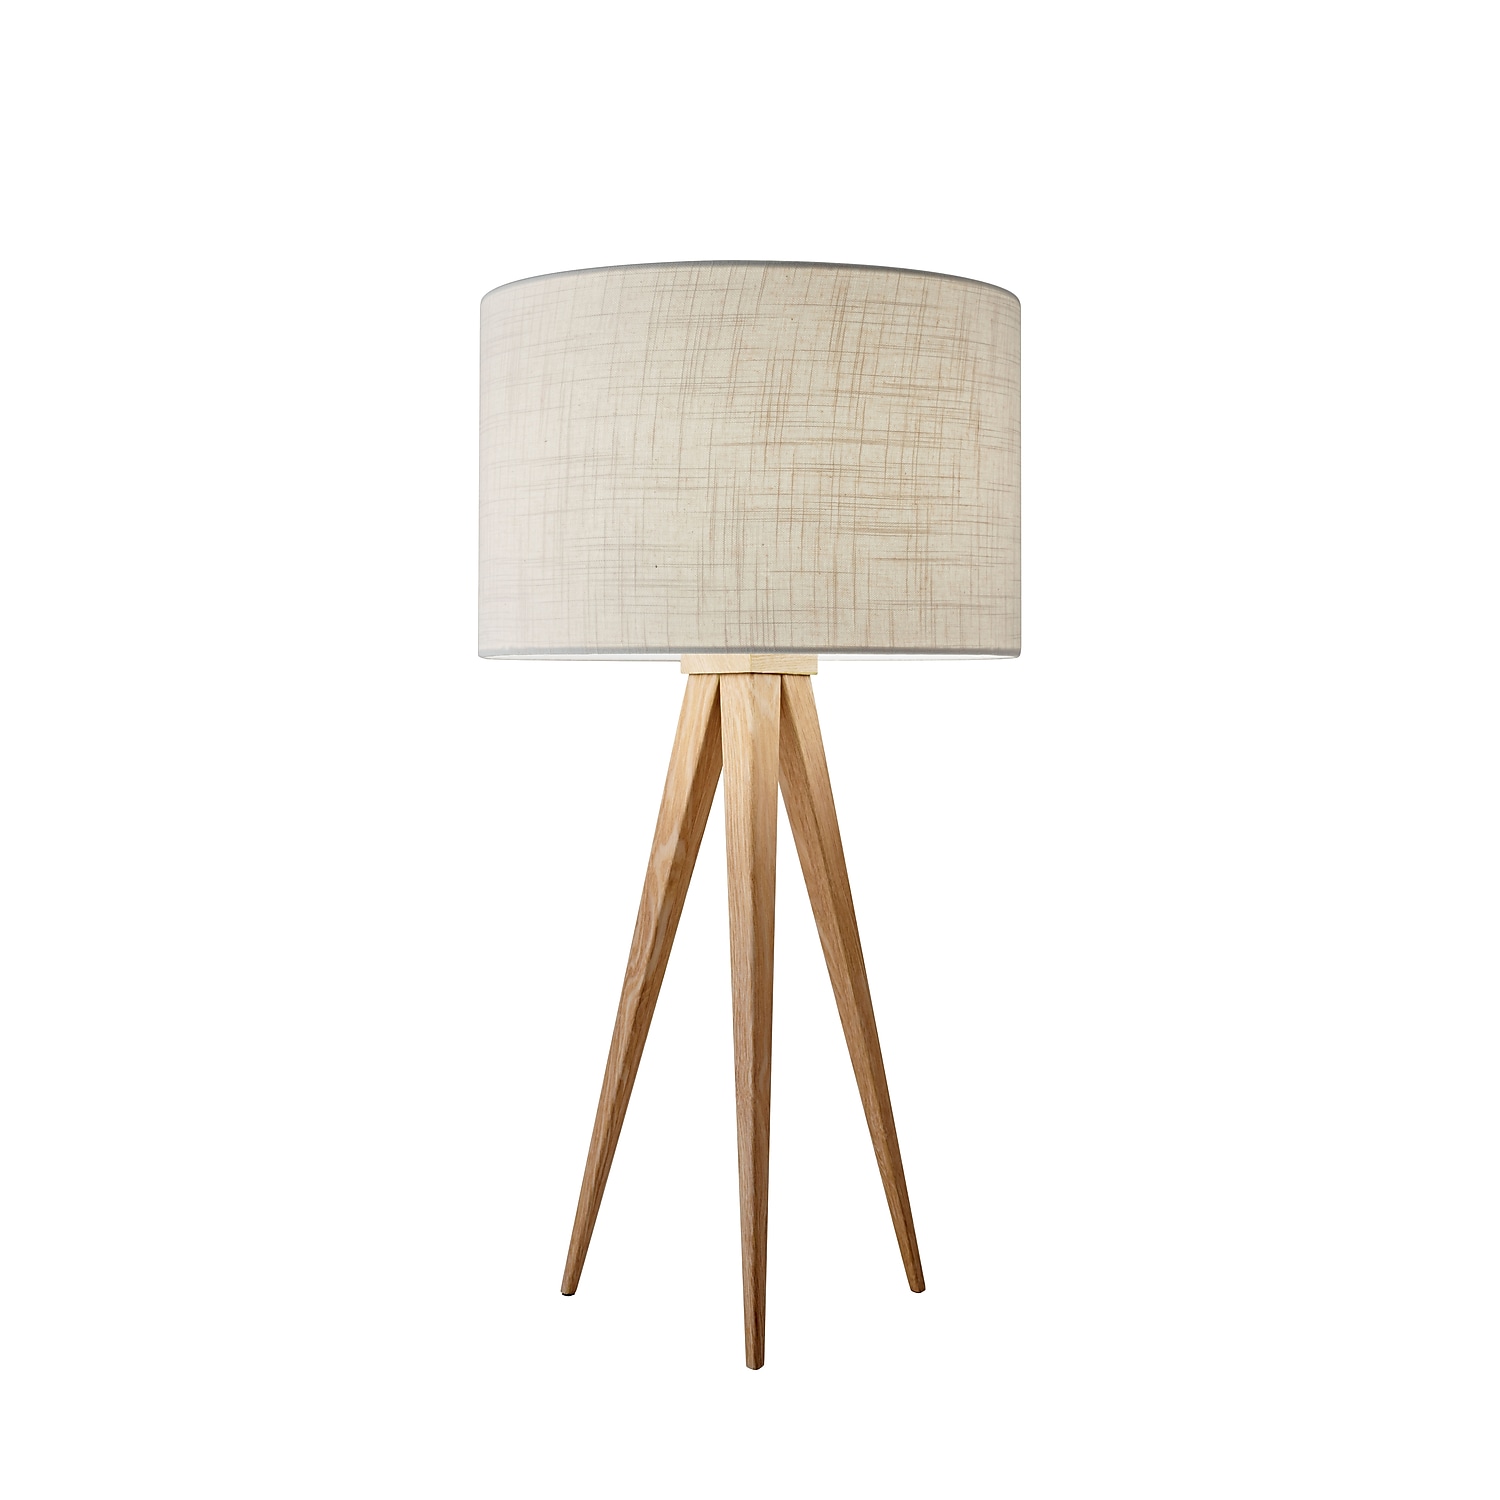 Adesso Home Director Metal Table Lamp in Natural - image 1 of 4